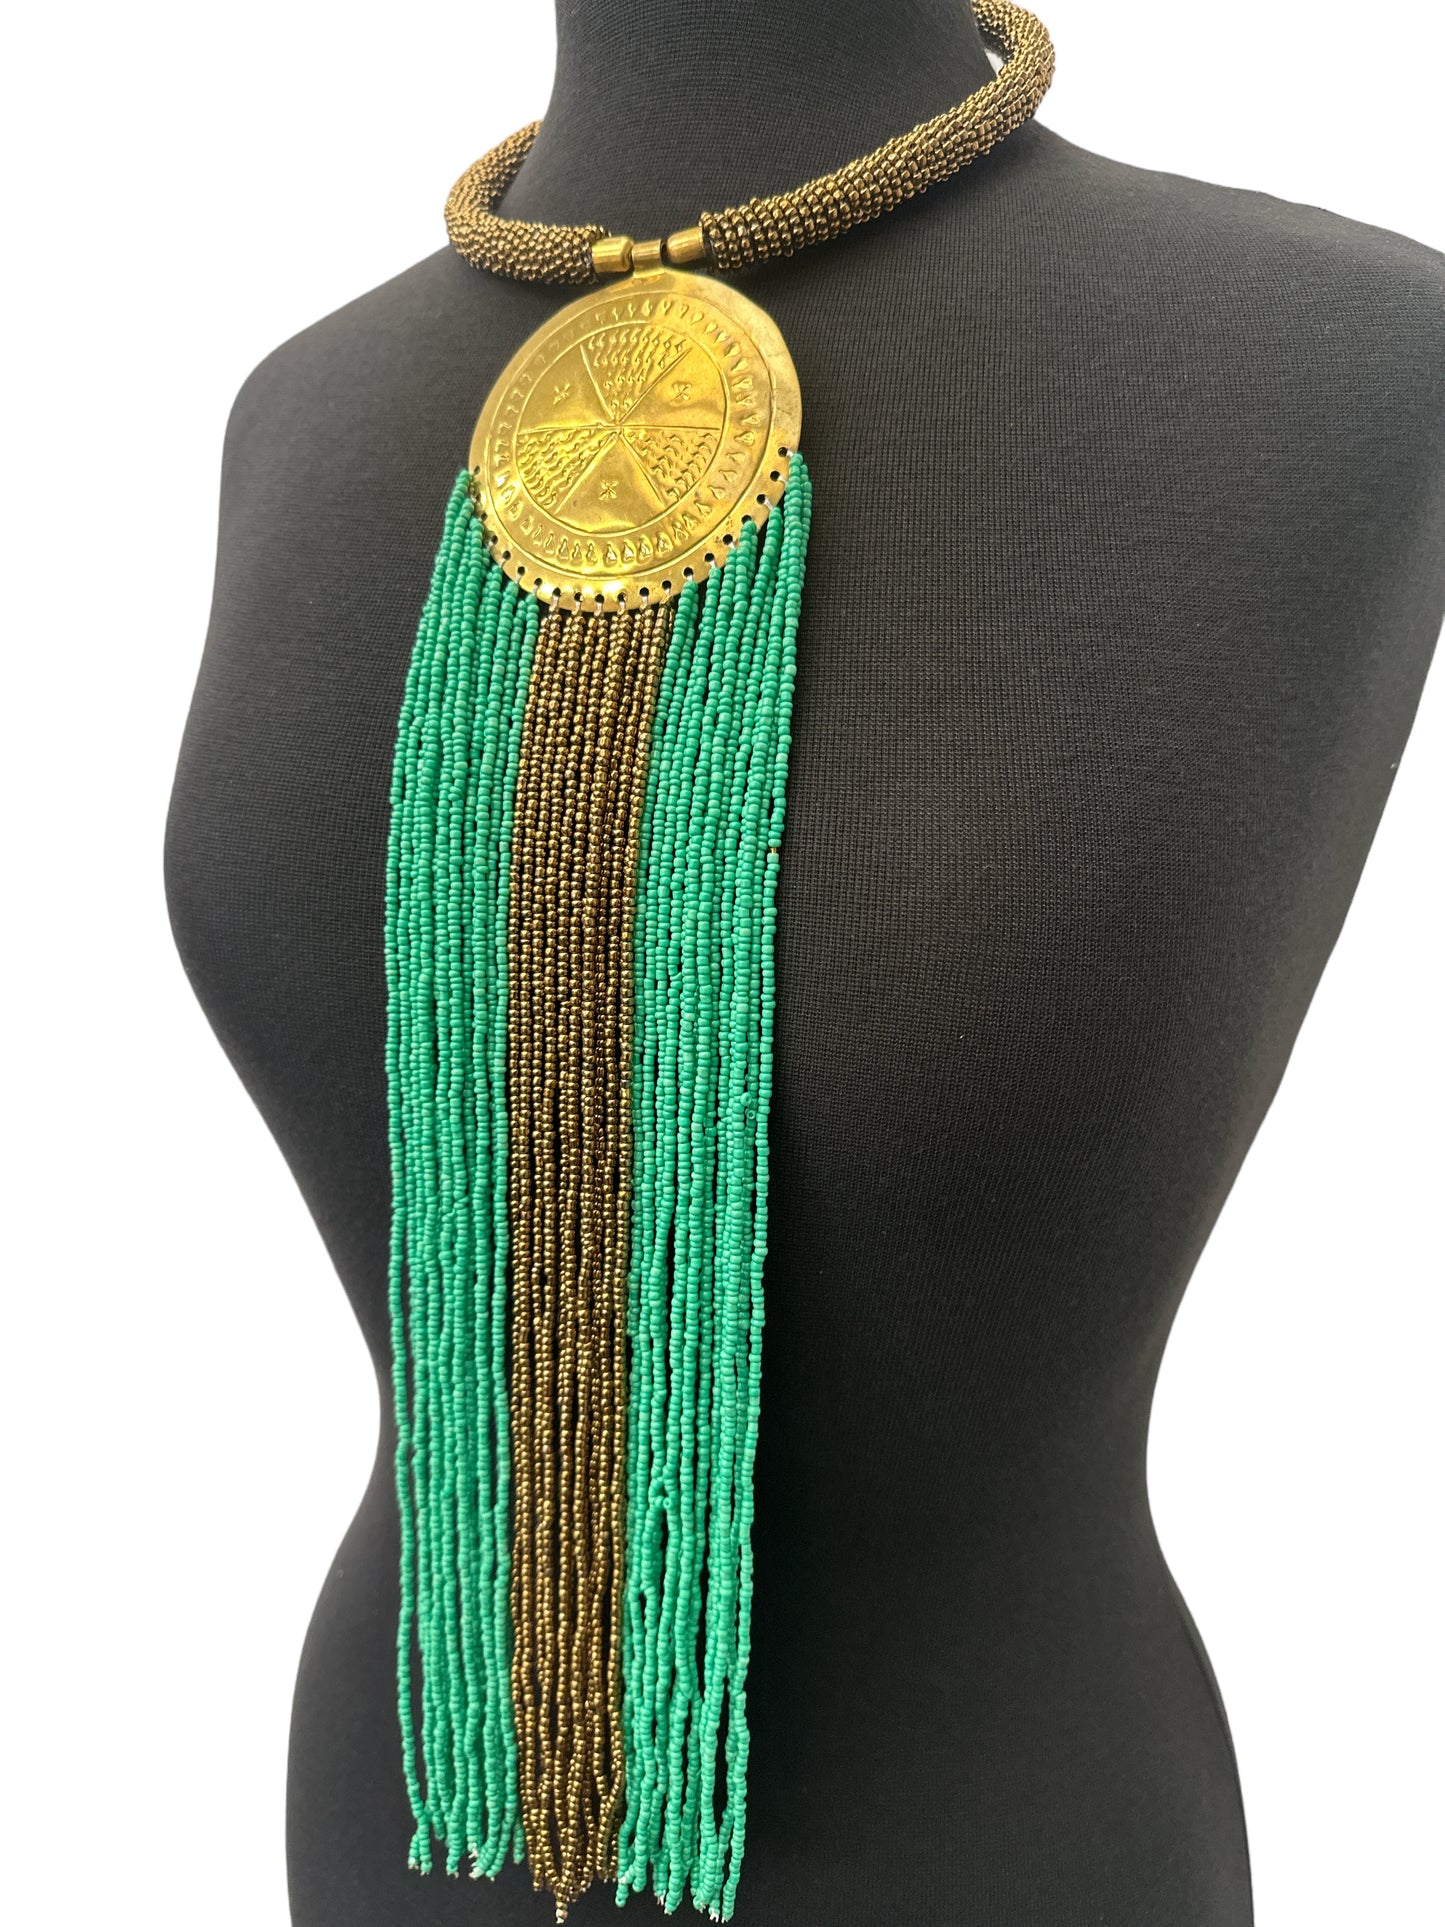 African Authentic Engraved Brass Long Green Beaded Fringe Pendant Necklace